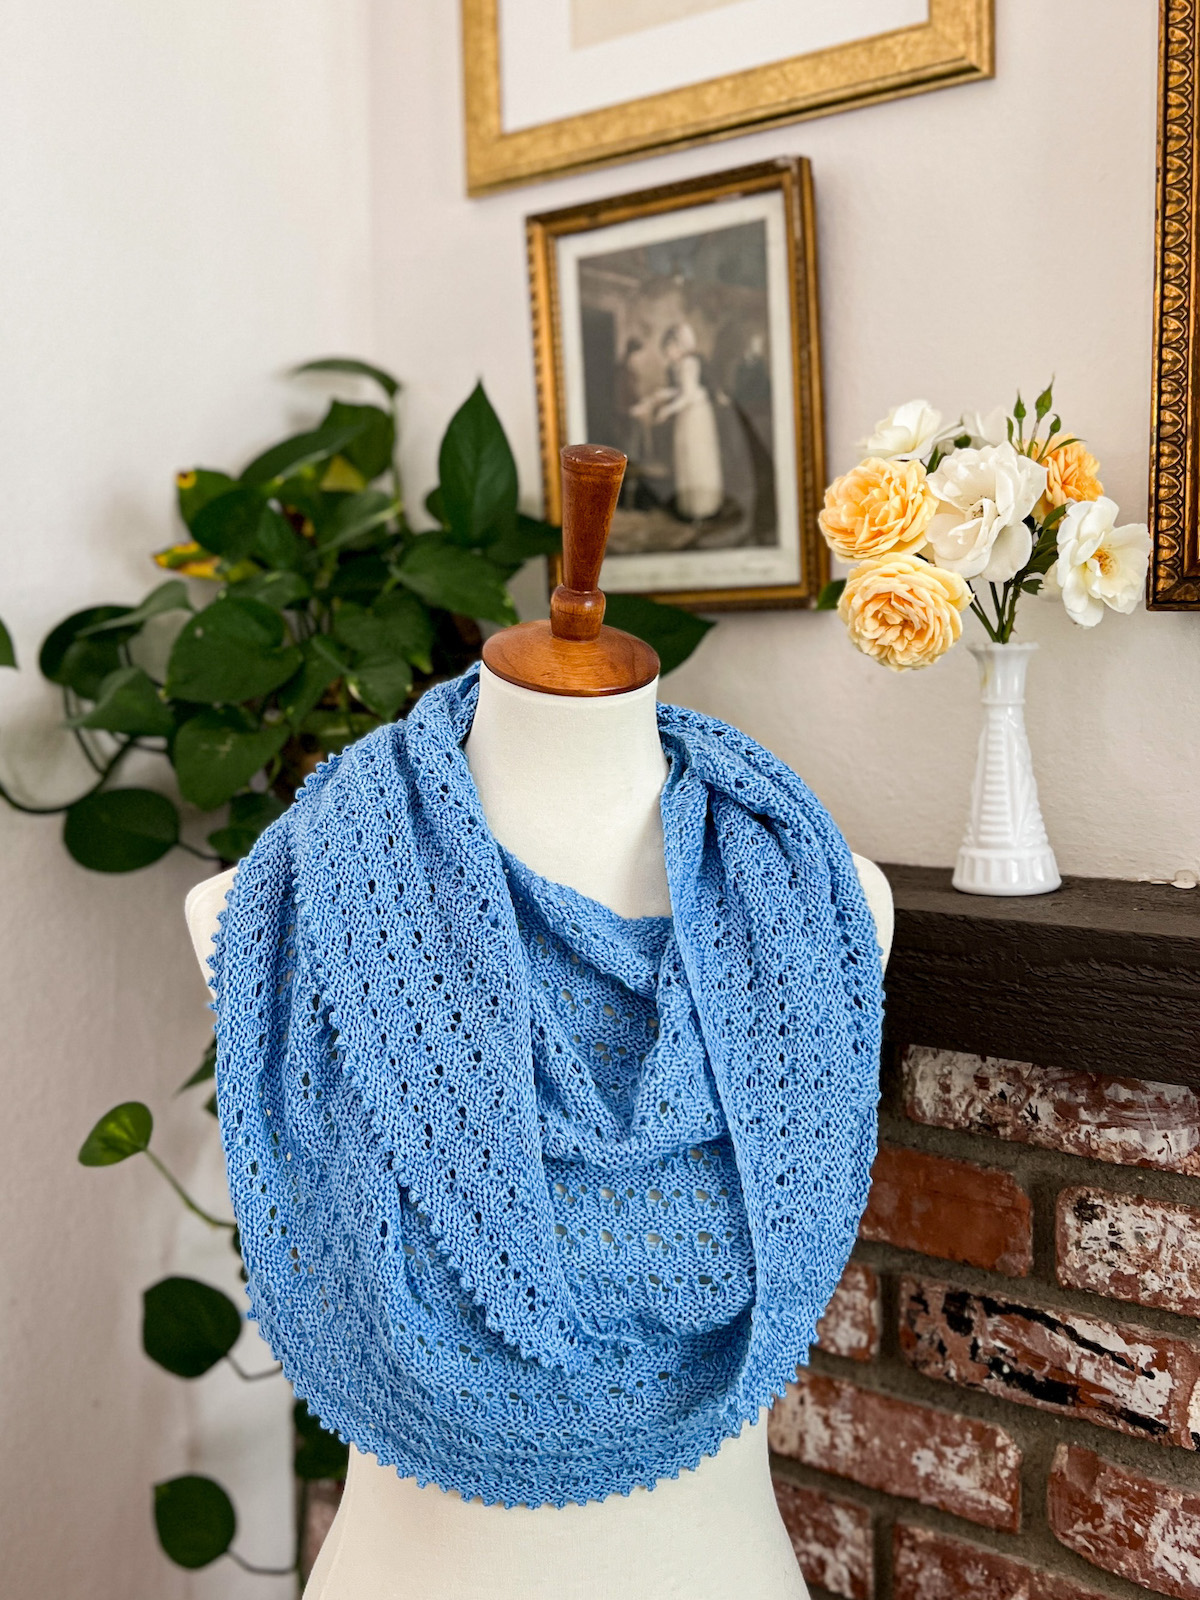 A light blue, crescent-shaped shawl is draped around a white dressmaker's form. The shawl has stripes with eyelet texture and stripes of garter stitch.